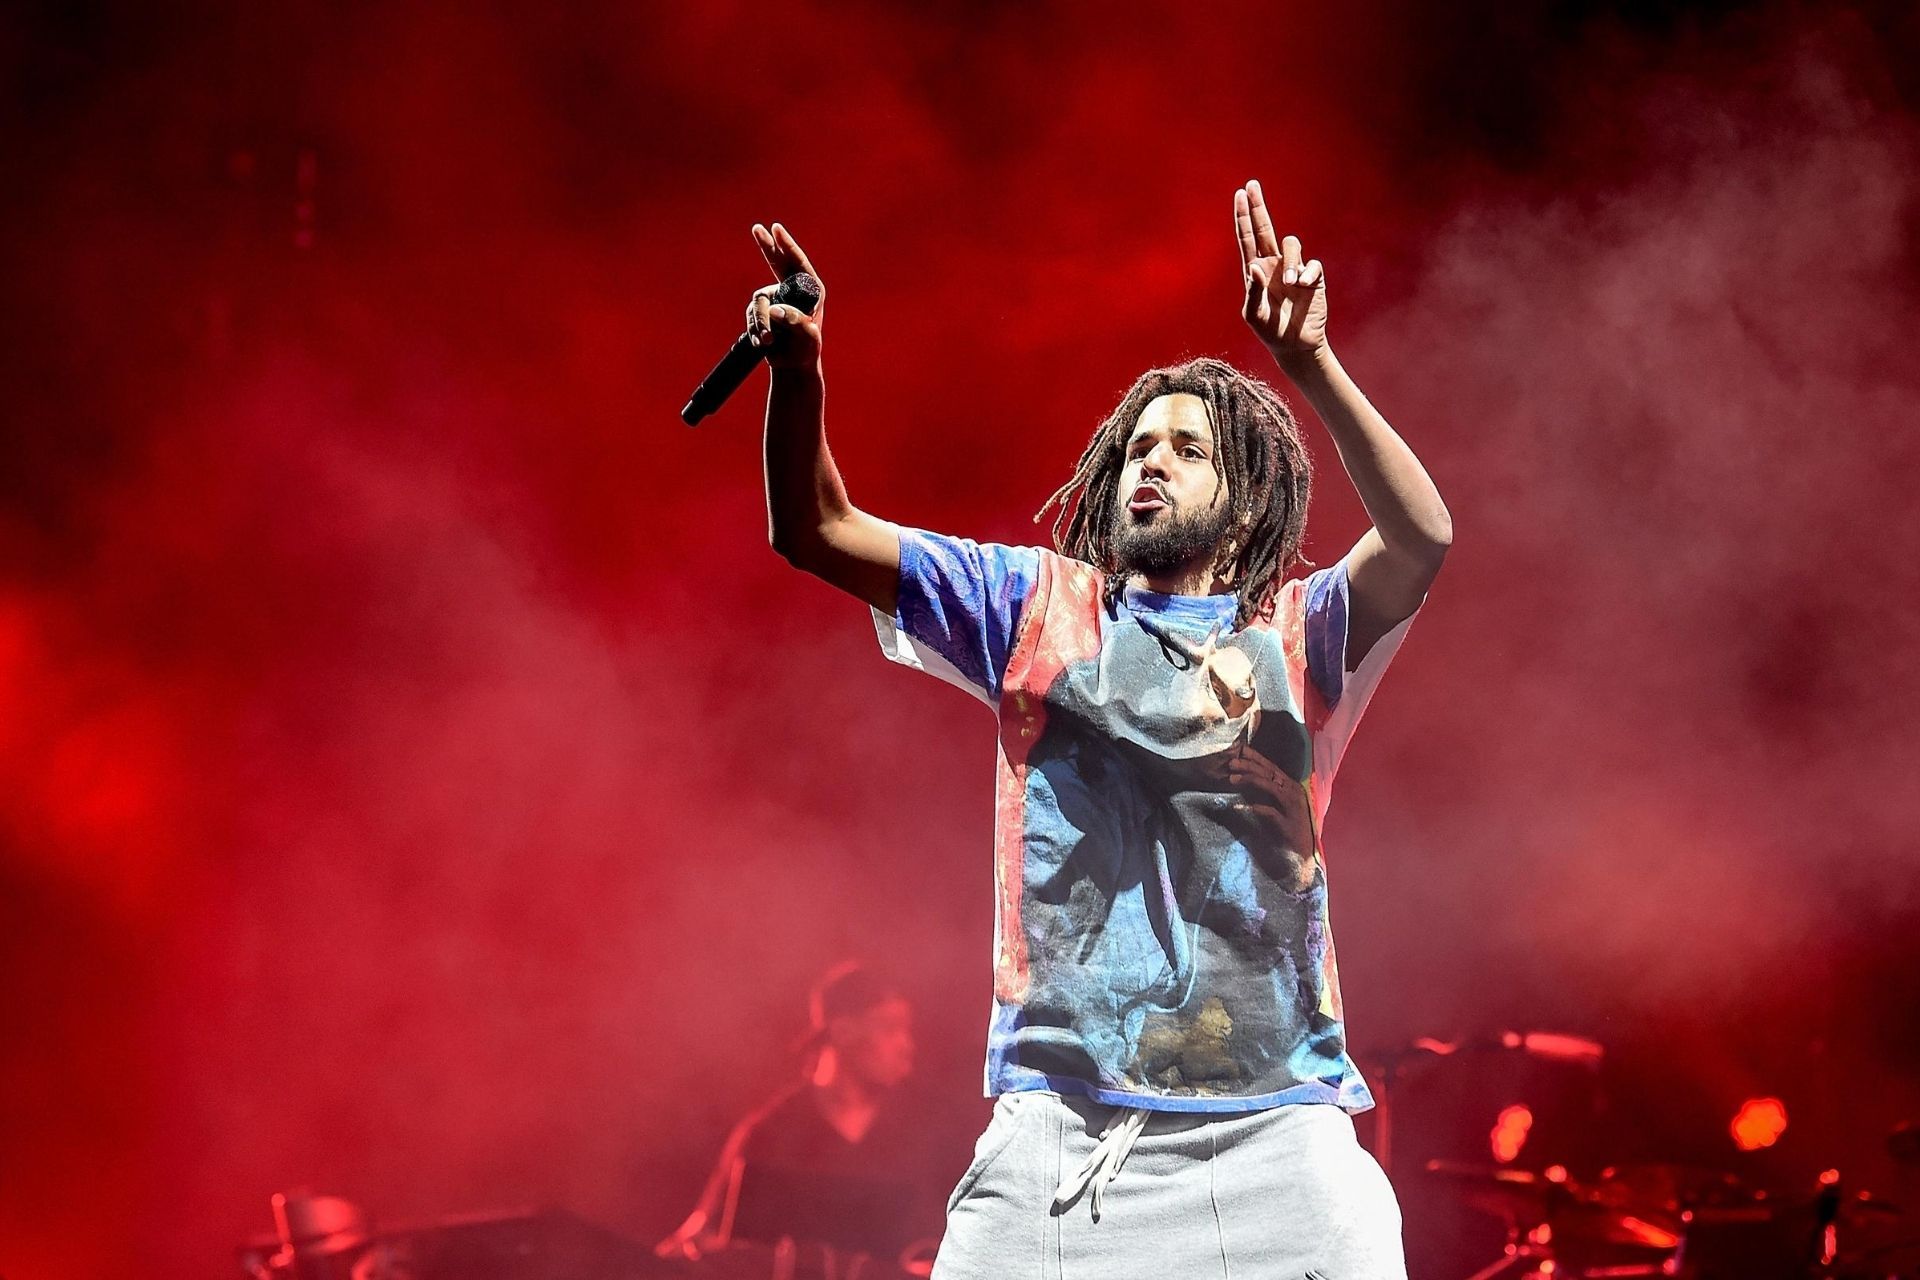 J. Cole Seriously Training to Play in the NBA, According to Master P